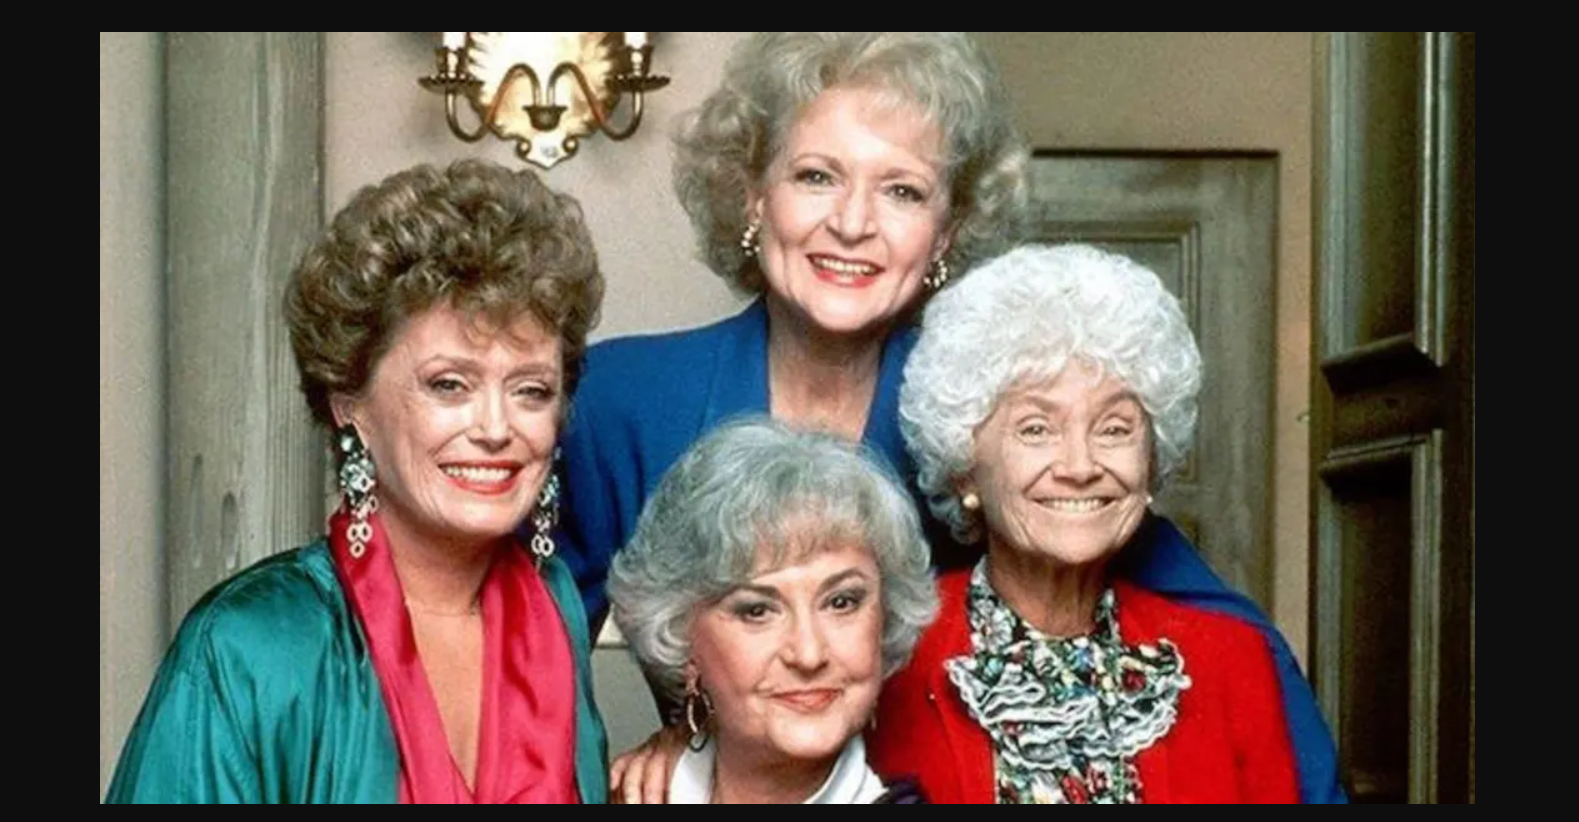 'Golden Girls' appears to get better with pop culture age